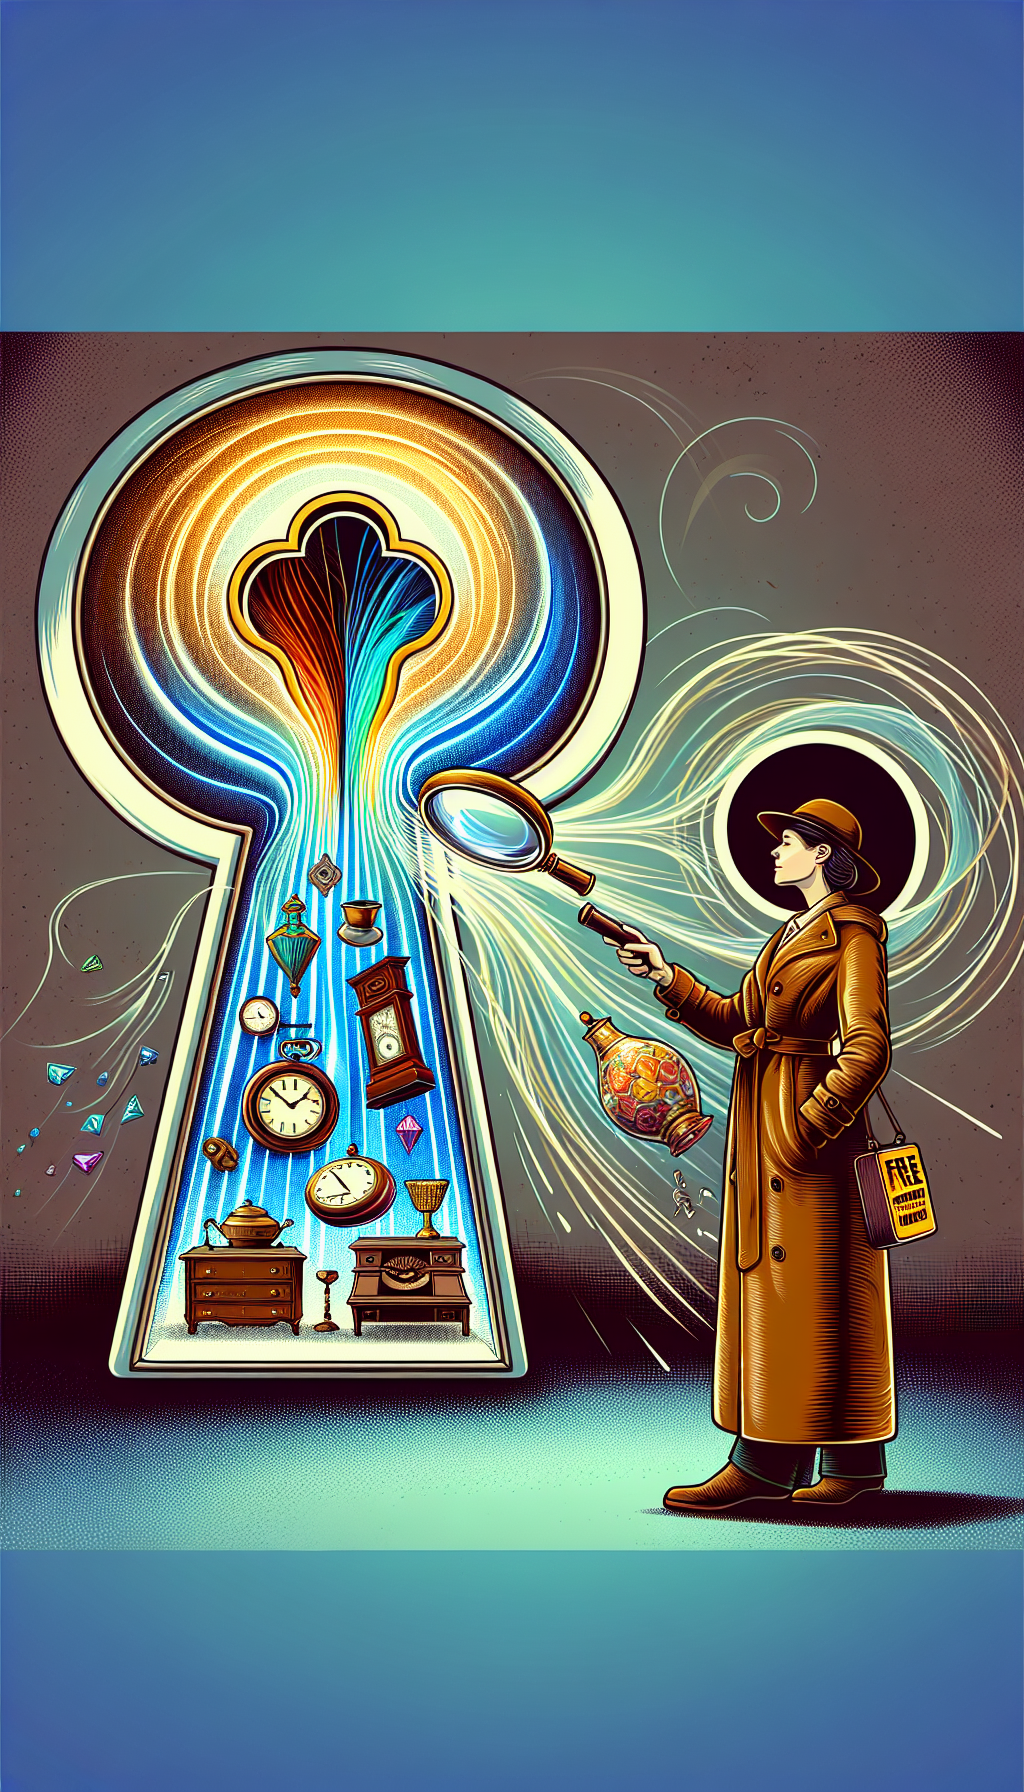 An illustration depicts a whimsical, oversized antique keyhole with vibrant, transparent waves emanating from it, symbolizing the signal reach. Various antique items (clock, vase, jewelry) float within the waves, being drawn towards a magnifying glass held by a detective-like figure with a badge stating "Free Appraisals". This signals the search and discovery of expert appraisers nearby.